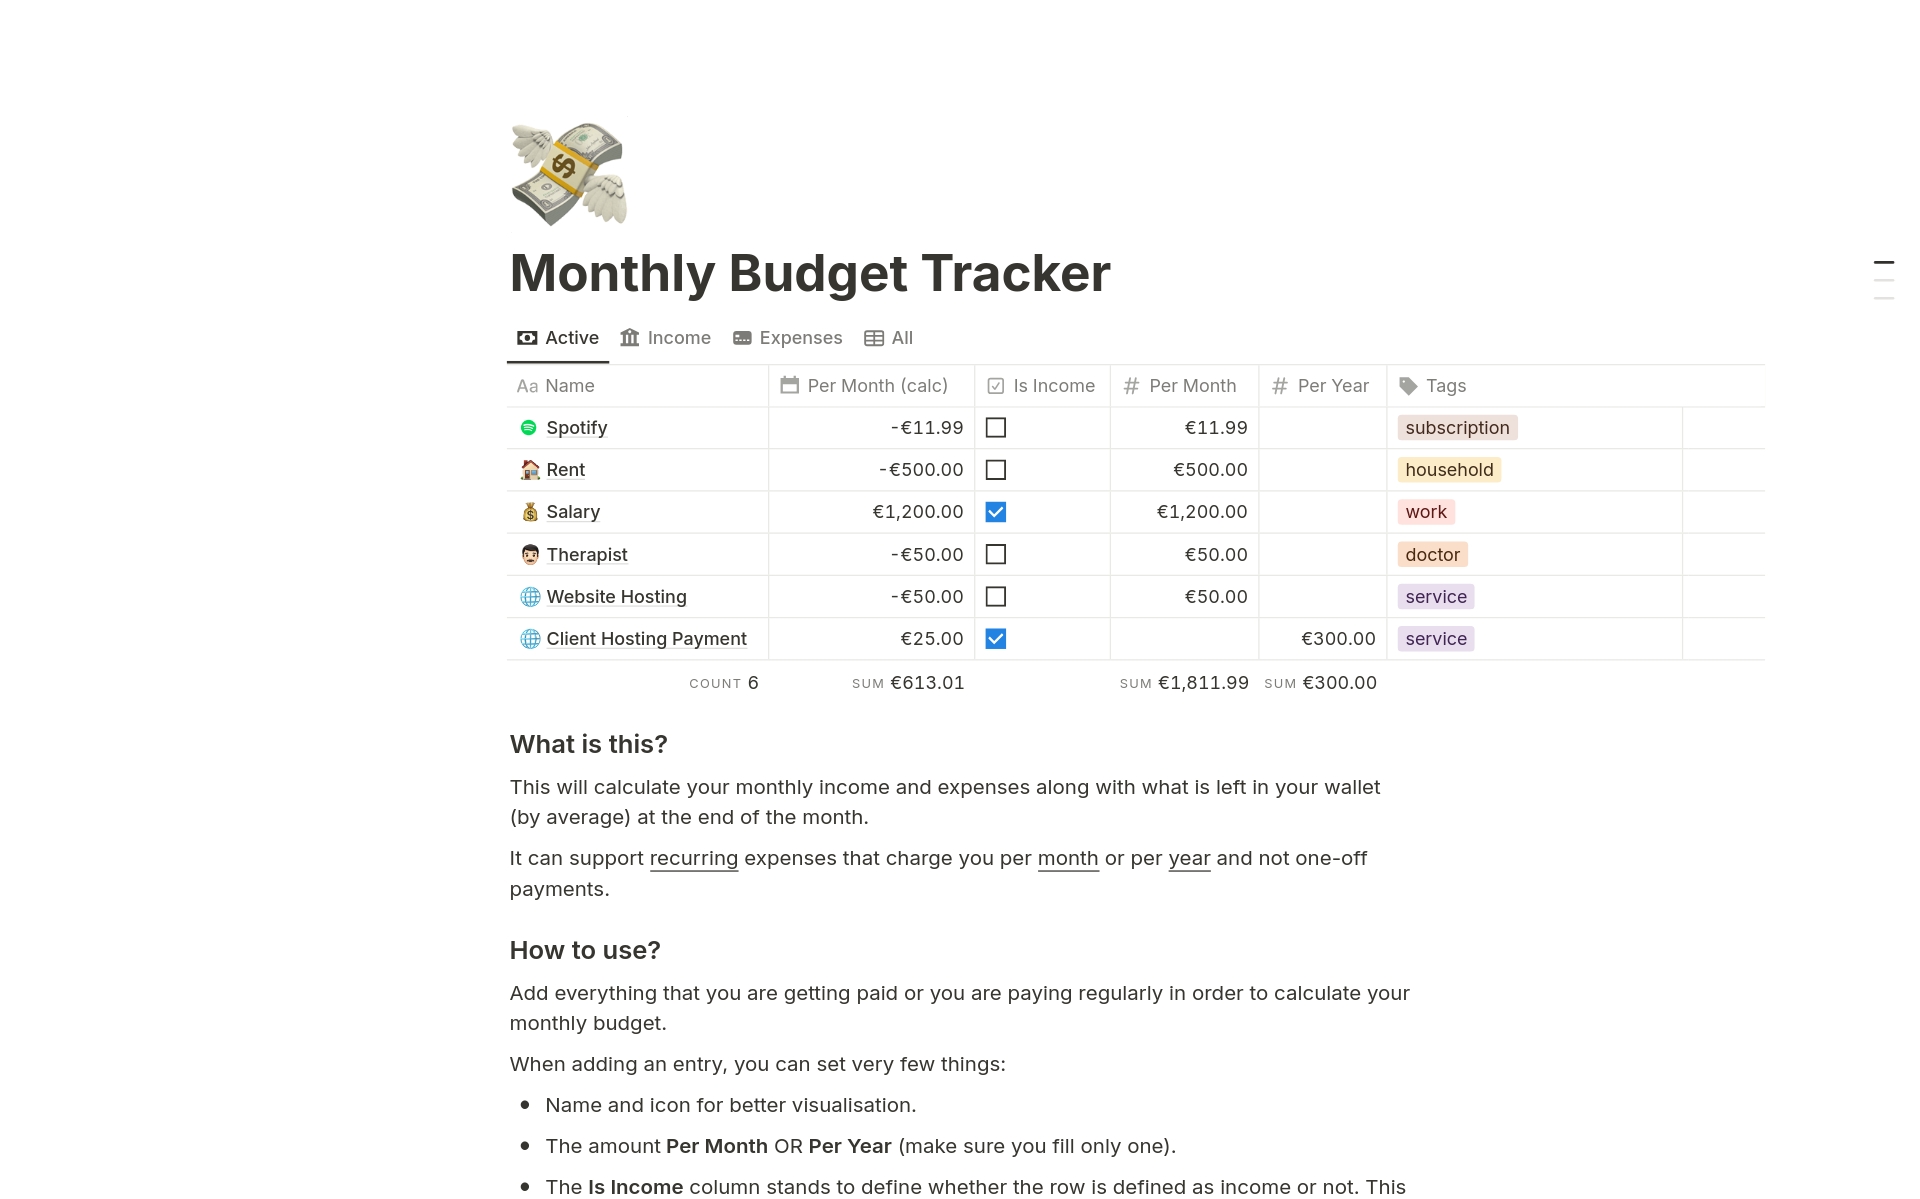 Calculate your monthly income and expenses along with what is left in your wallet (by average) at the end of the month. 
Supports recurring expenses that charge you per month or per year and not one-off payments.